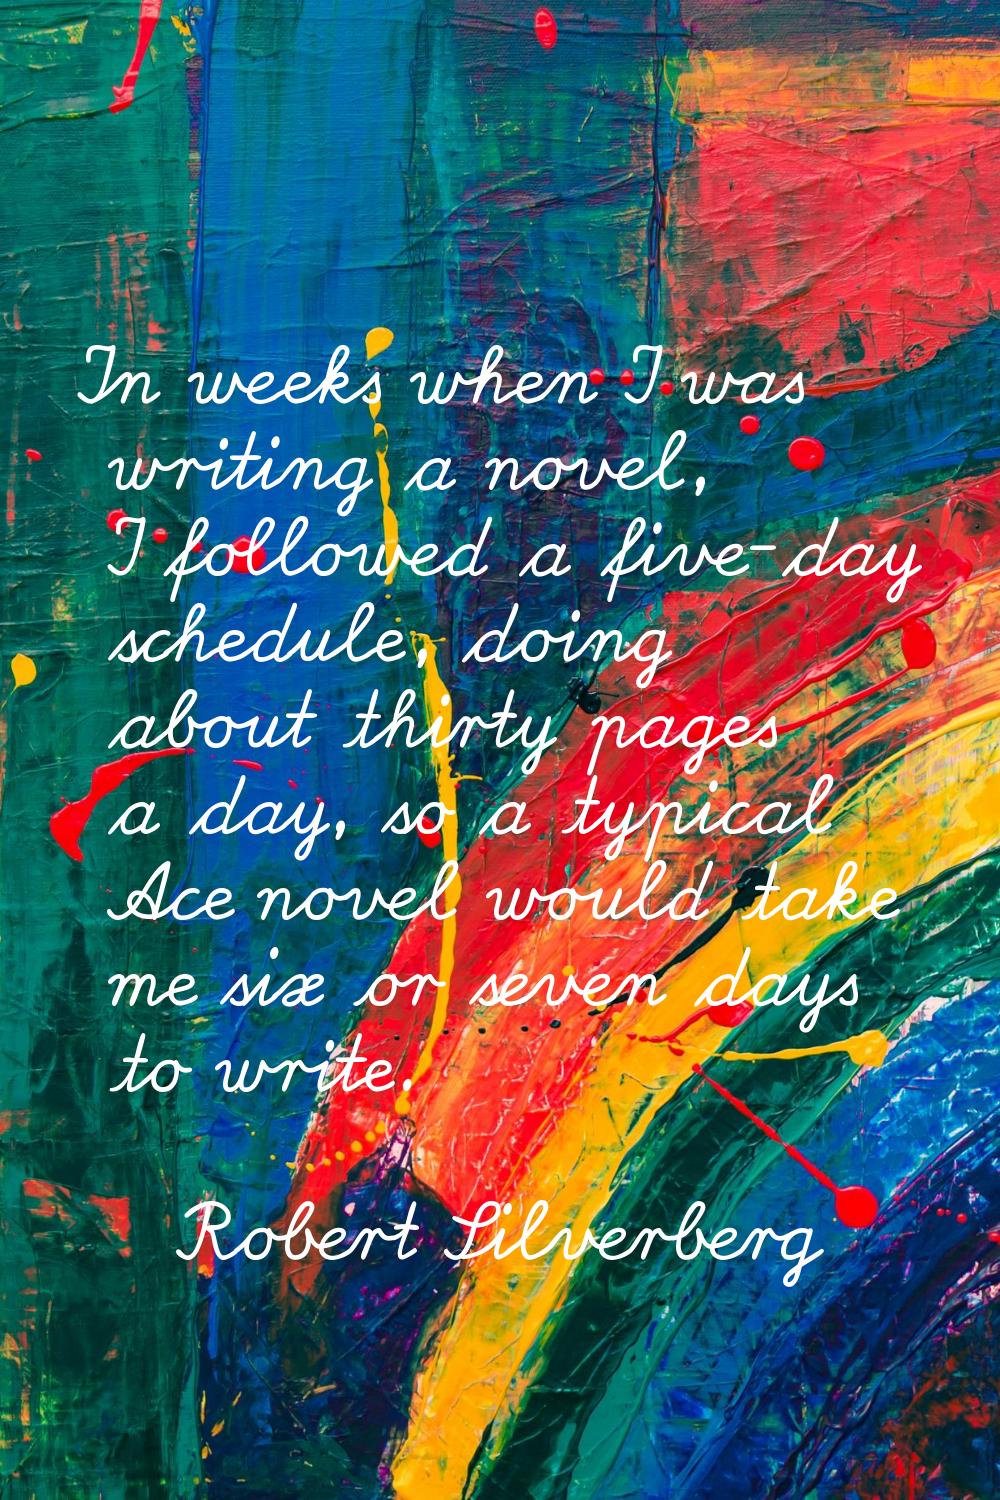 In weeks when I was writing a novel, I followed a five-day schedule, doing about thirty pages a day